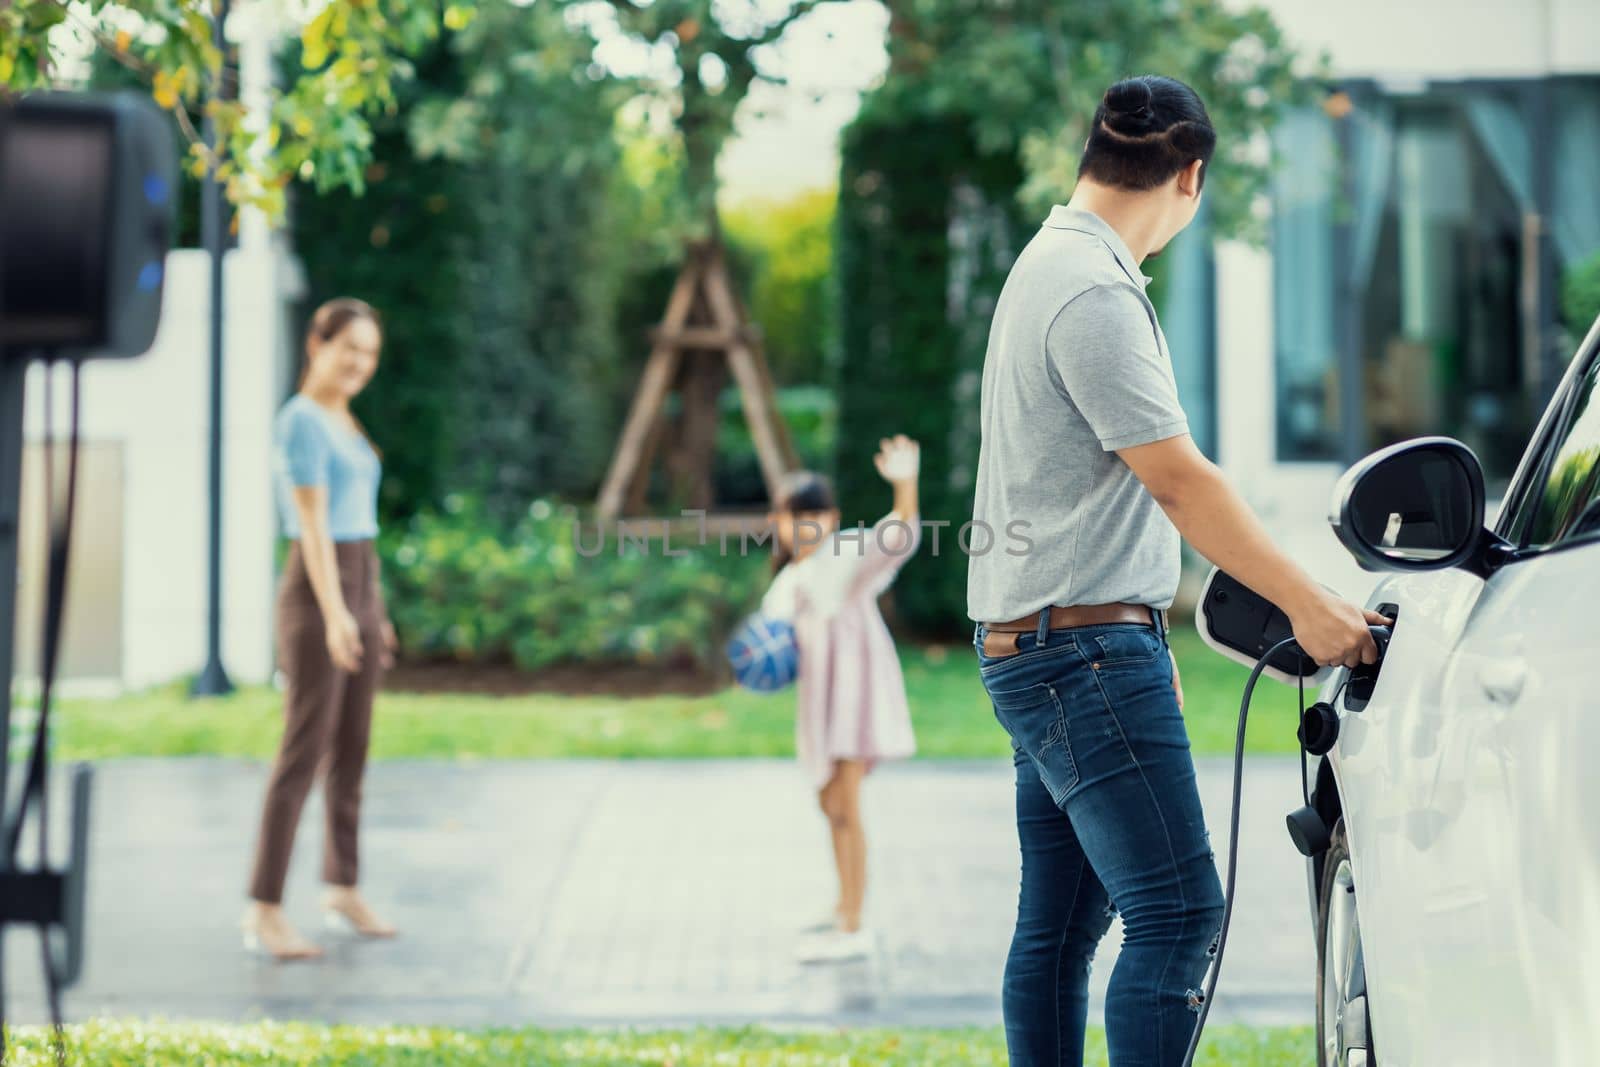 Focus image of progressive man charging electric car from home charging station with blur mother and daughter playing together in the background.